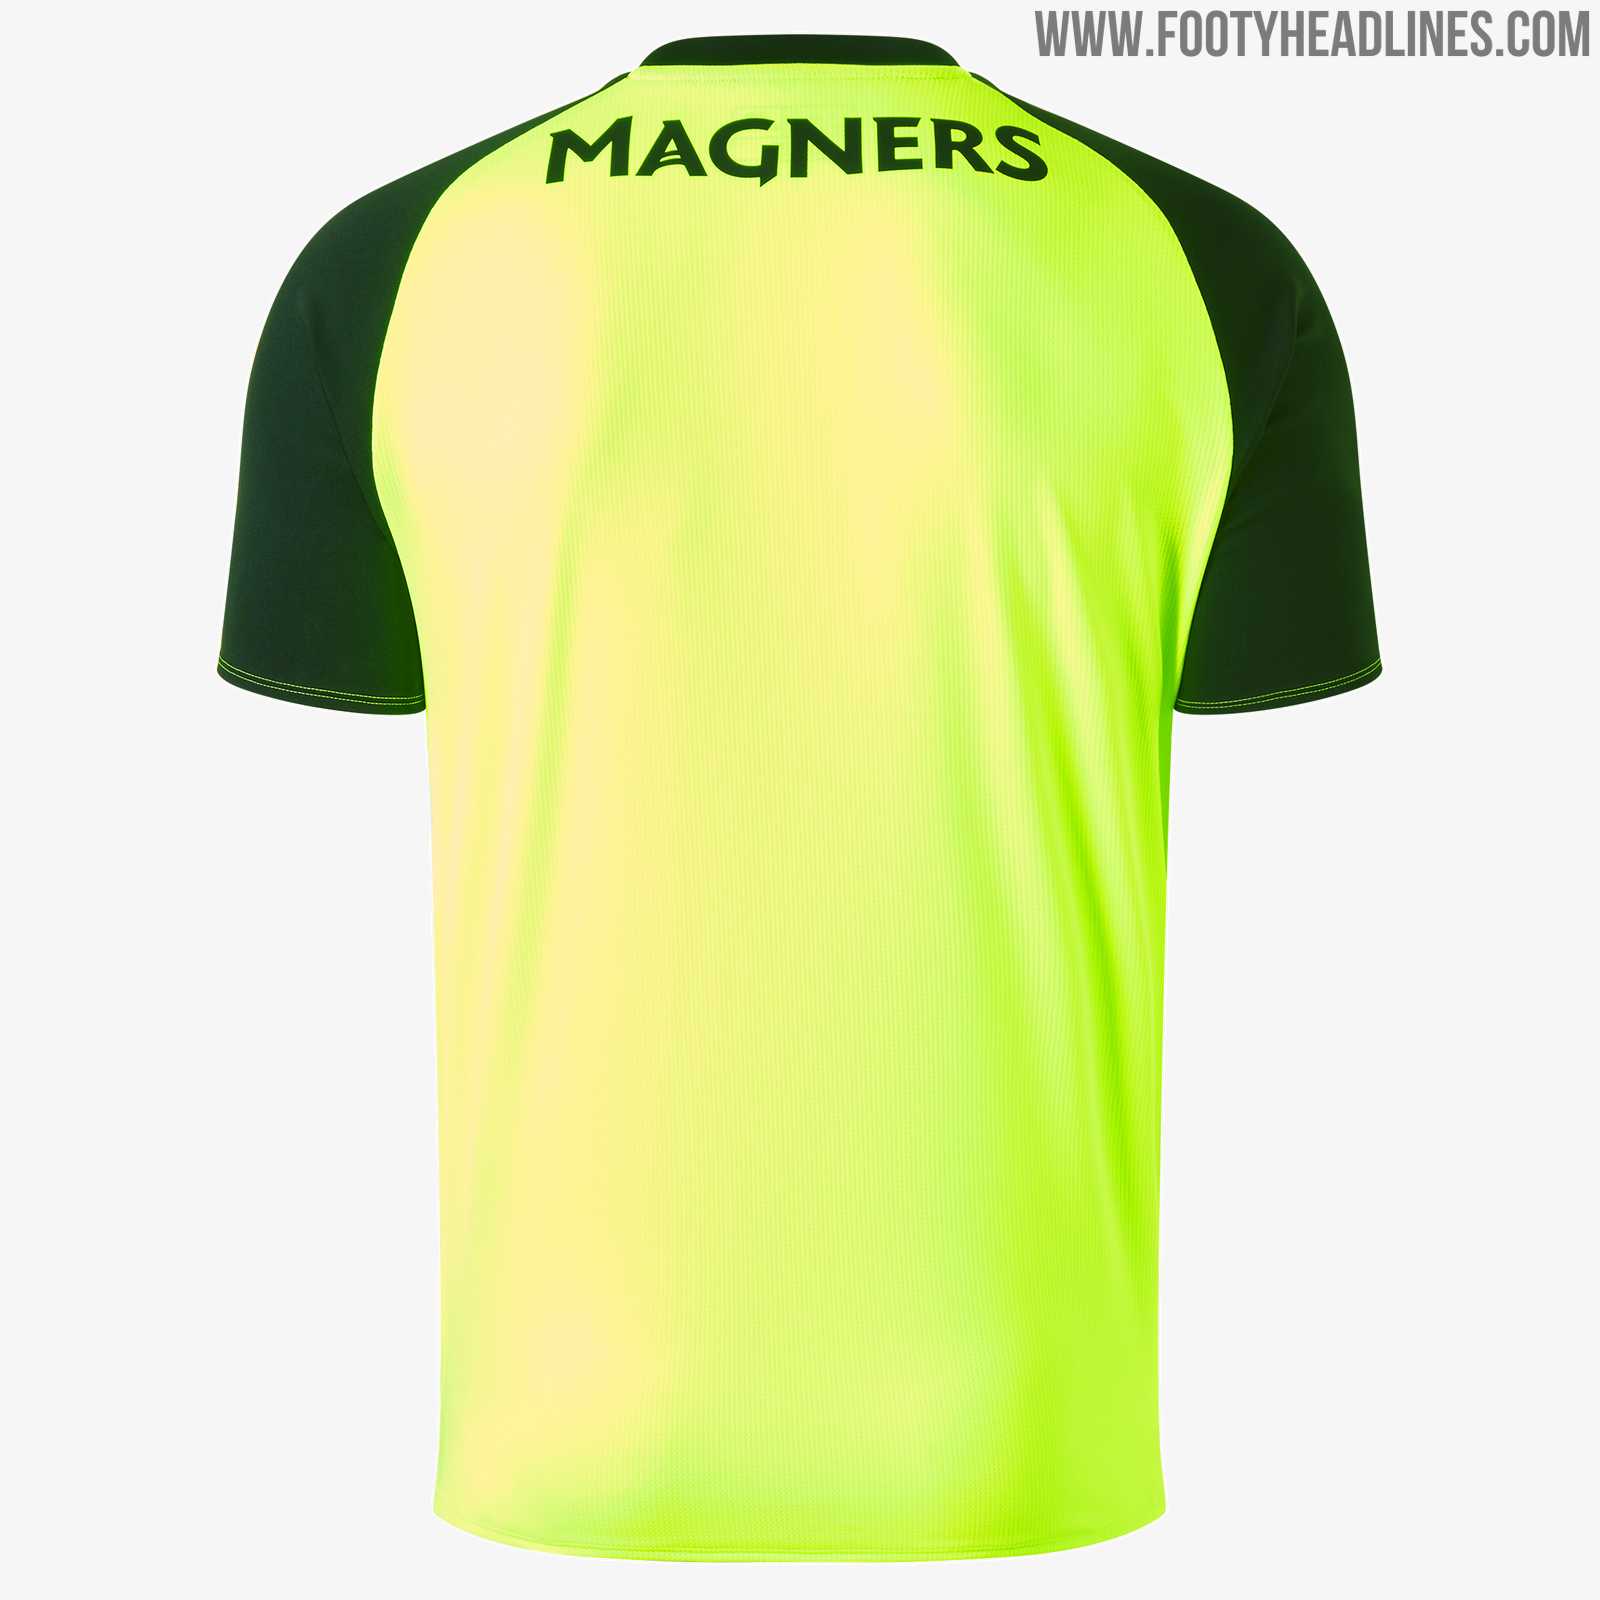 Celtic launch new third kit with fans dismayed at fresh bold